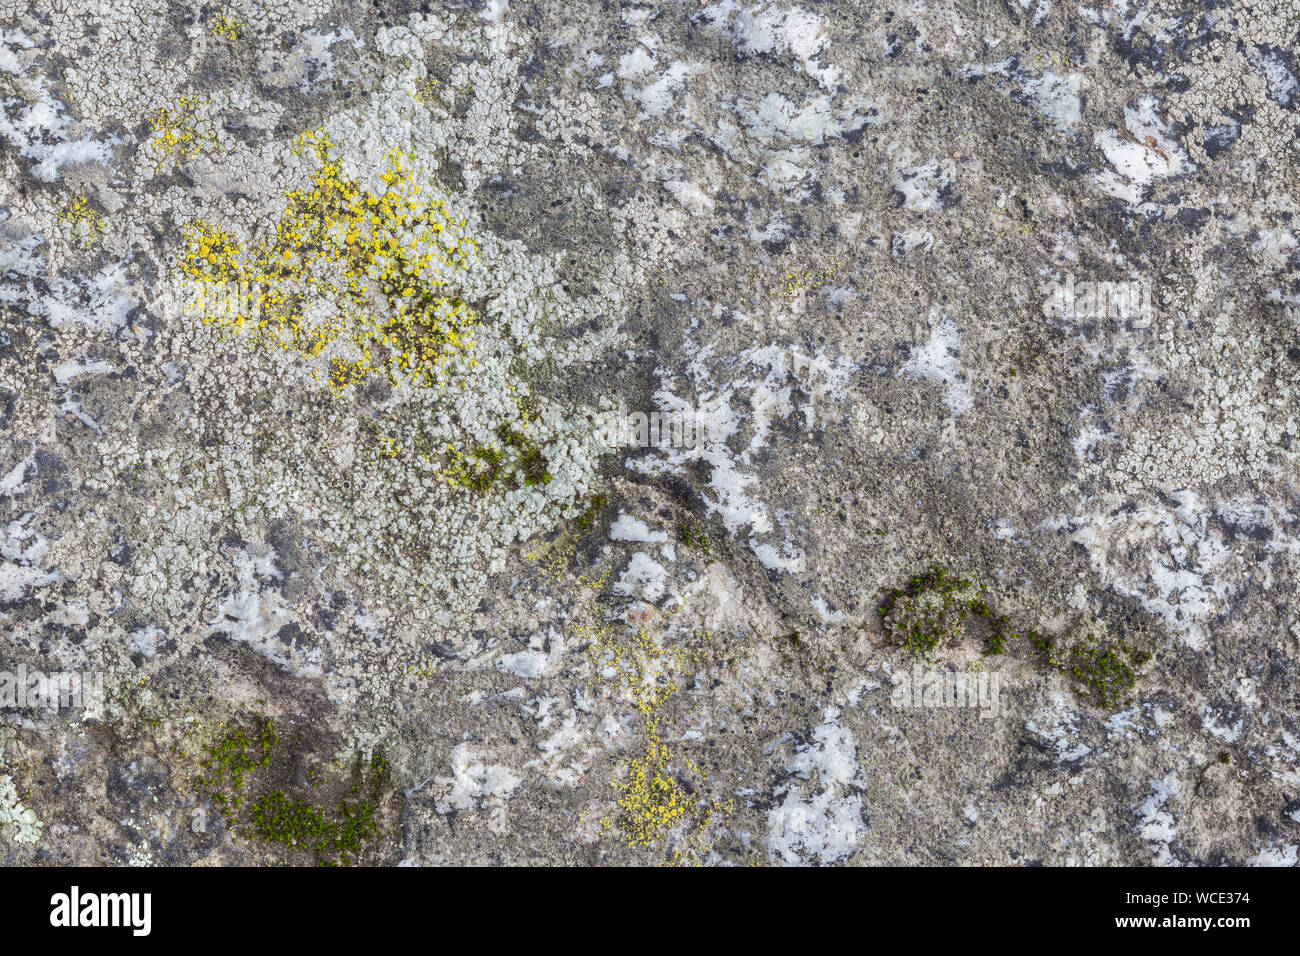 Close-up of a rock surface with lichen. High resolution full frame textured background. Stock Photo